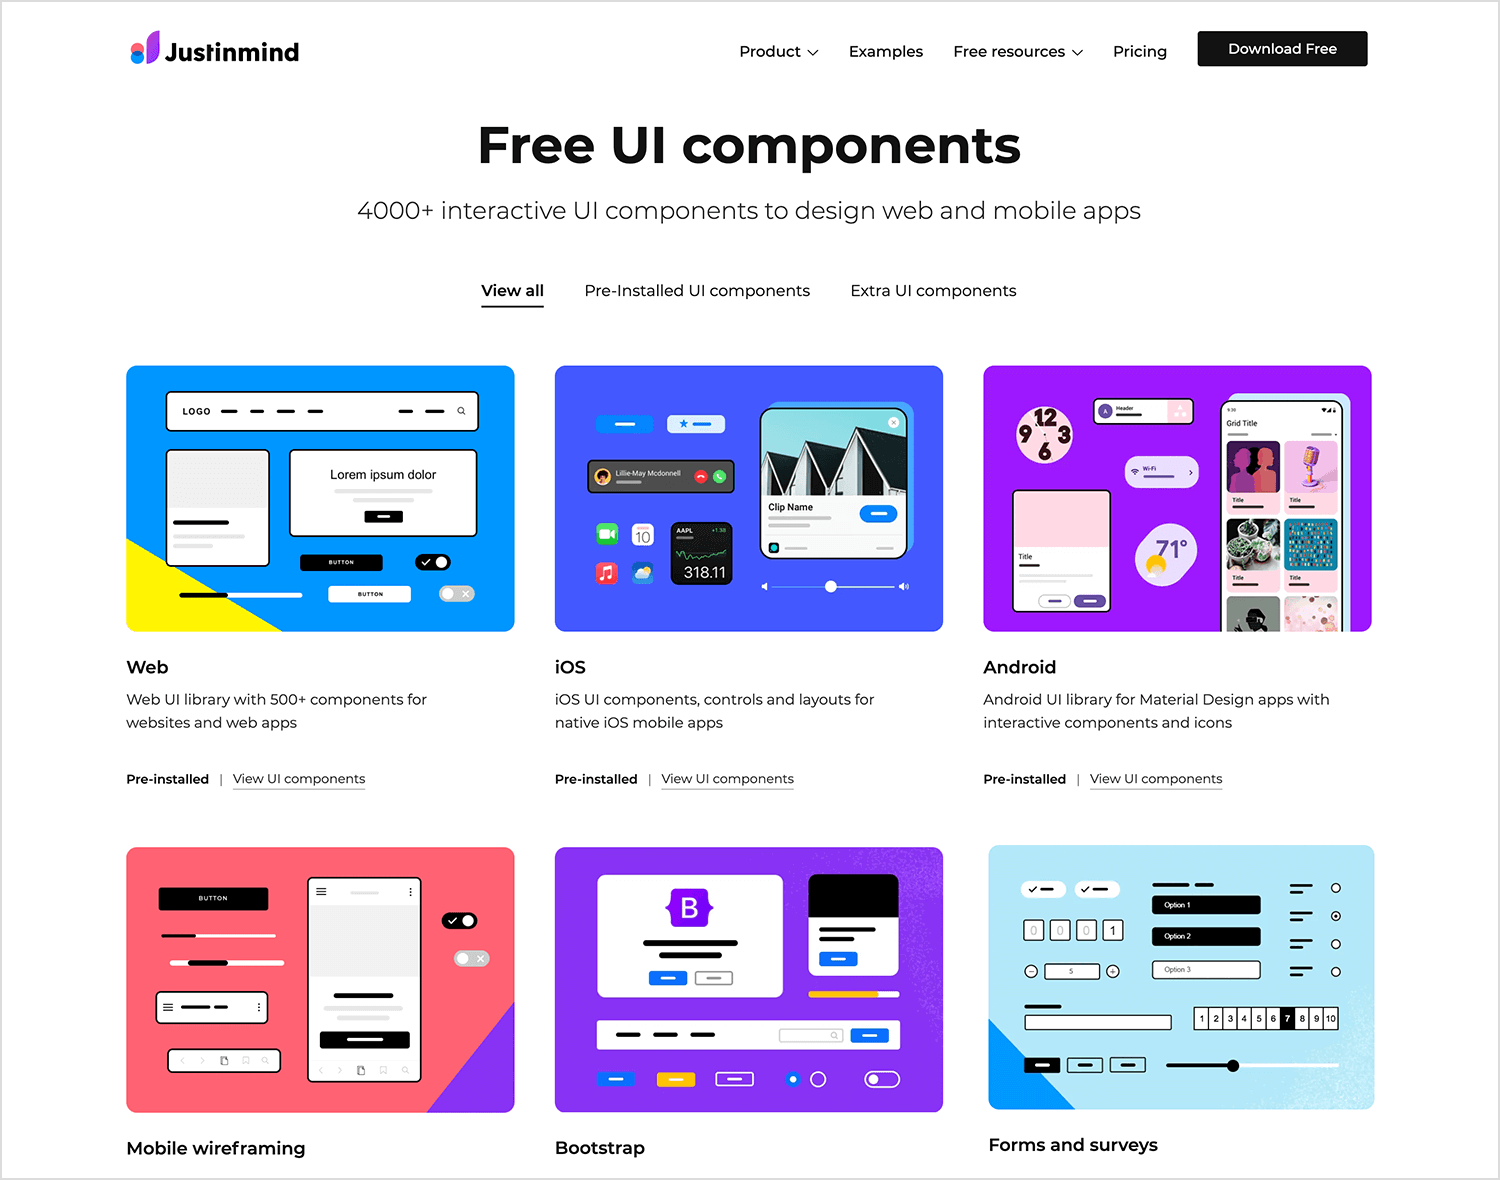 Justinmind free UI components overview